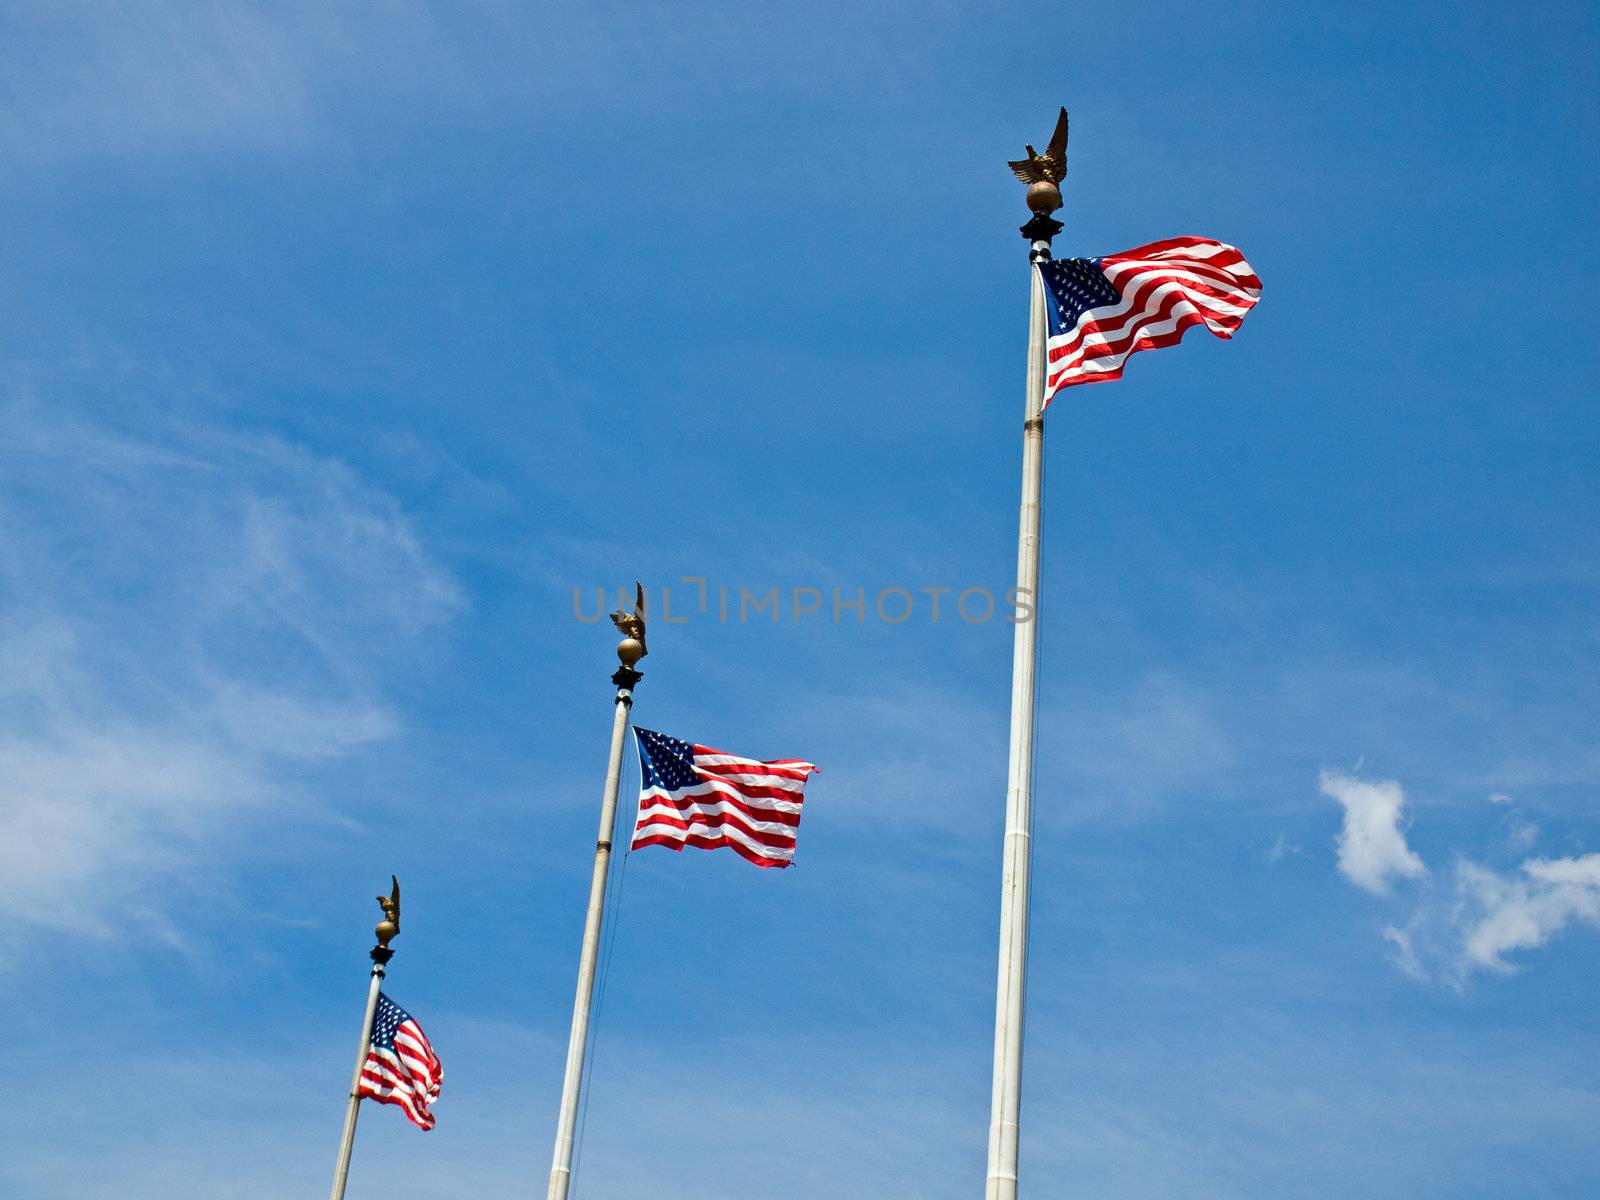 Three American Flags Waving Proudly on Tall Flagpoles